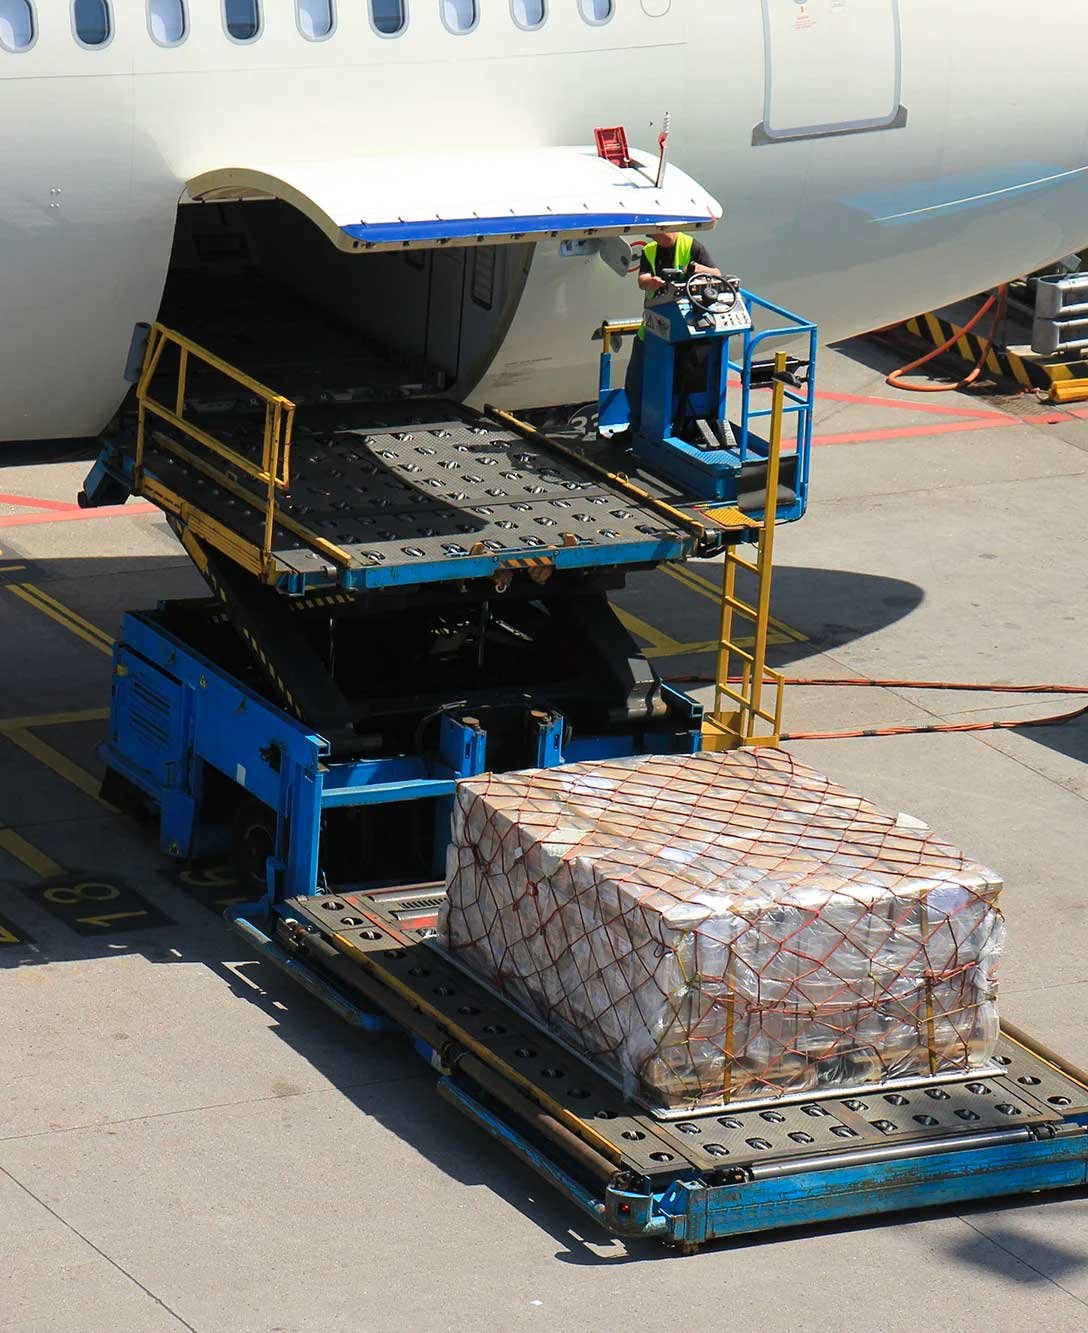 workers loading a cargo plane on a tarmac